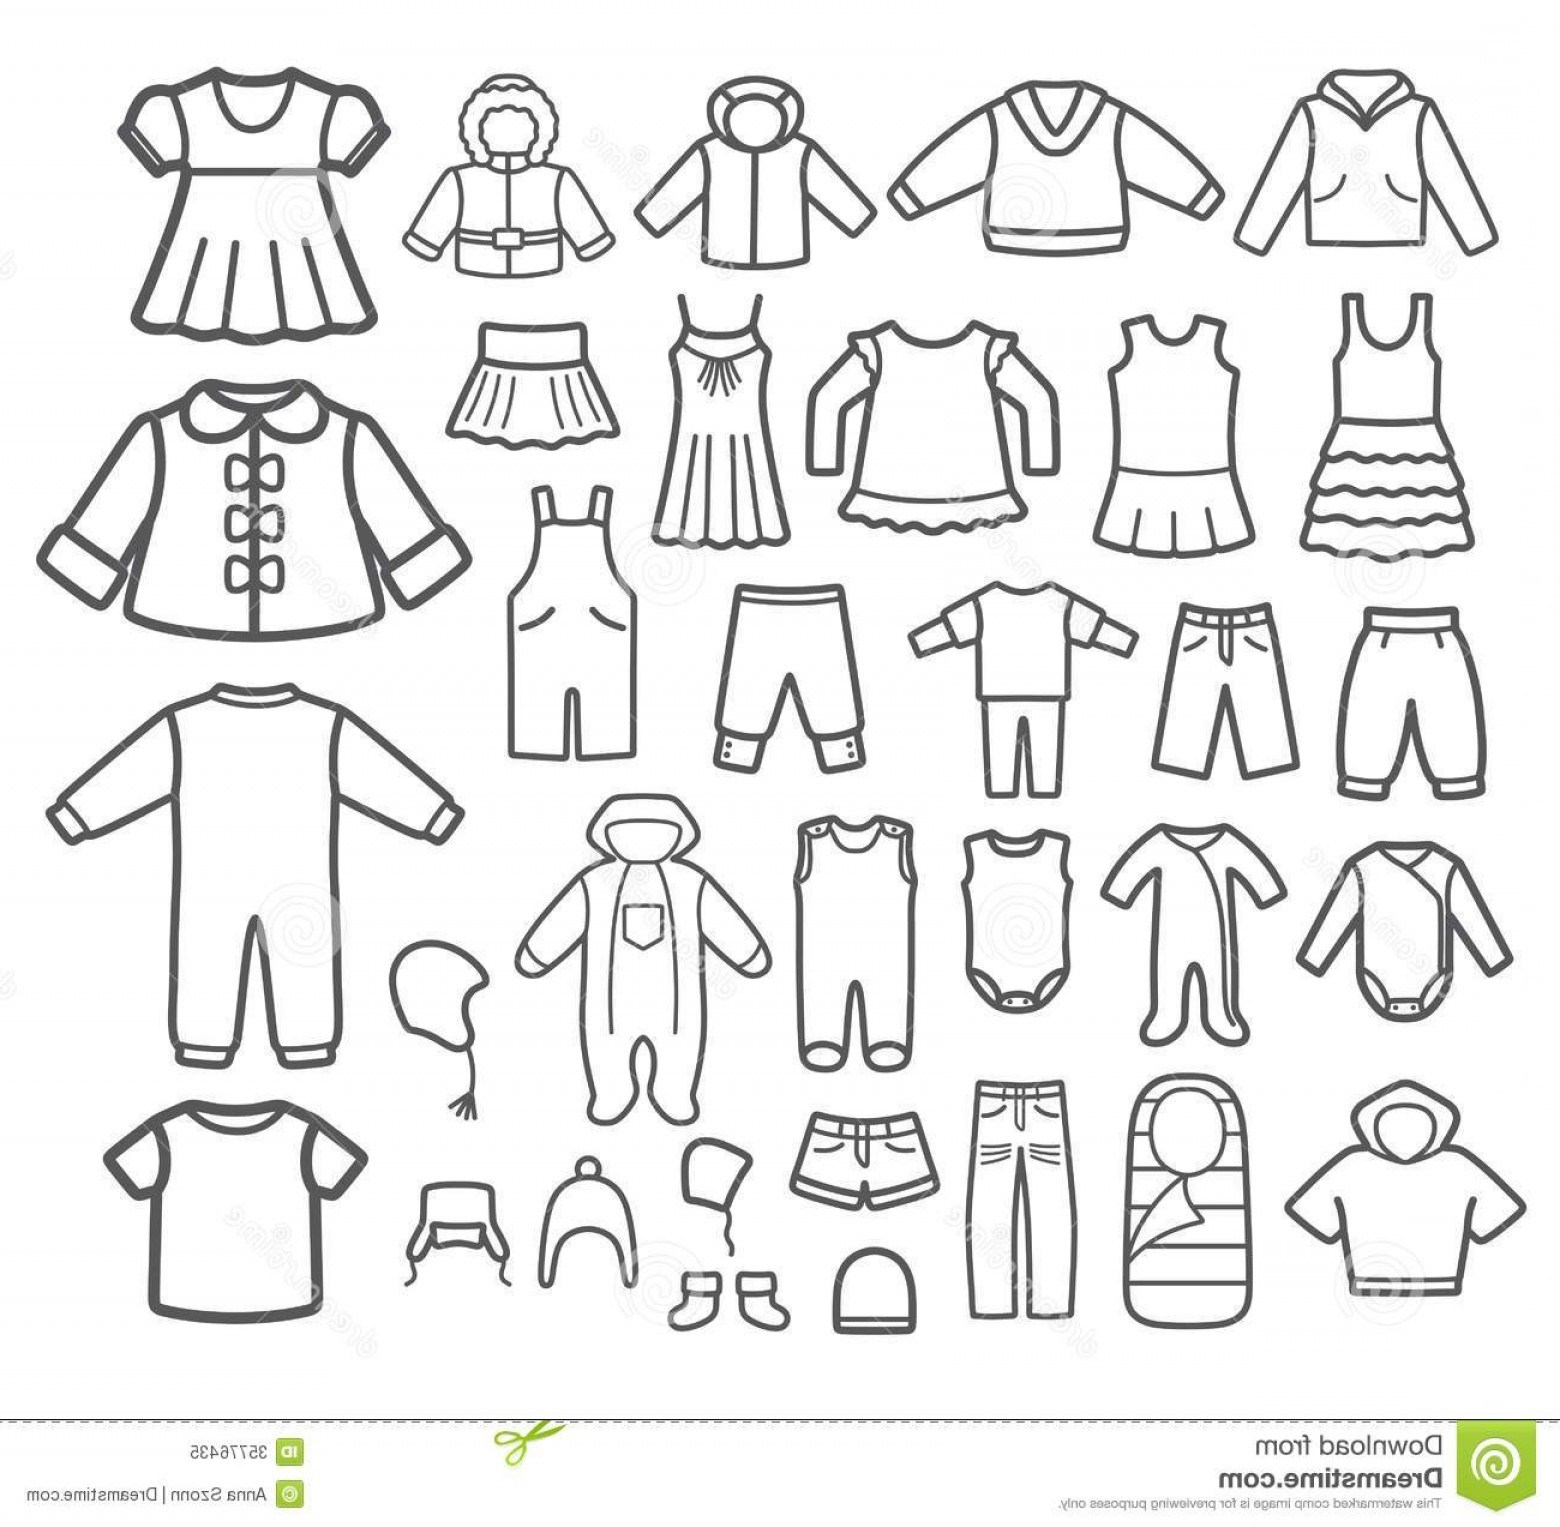 Kids clothes clipart black and white